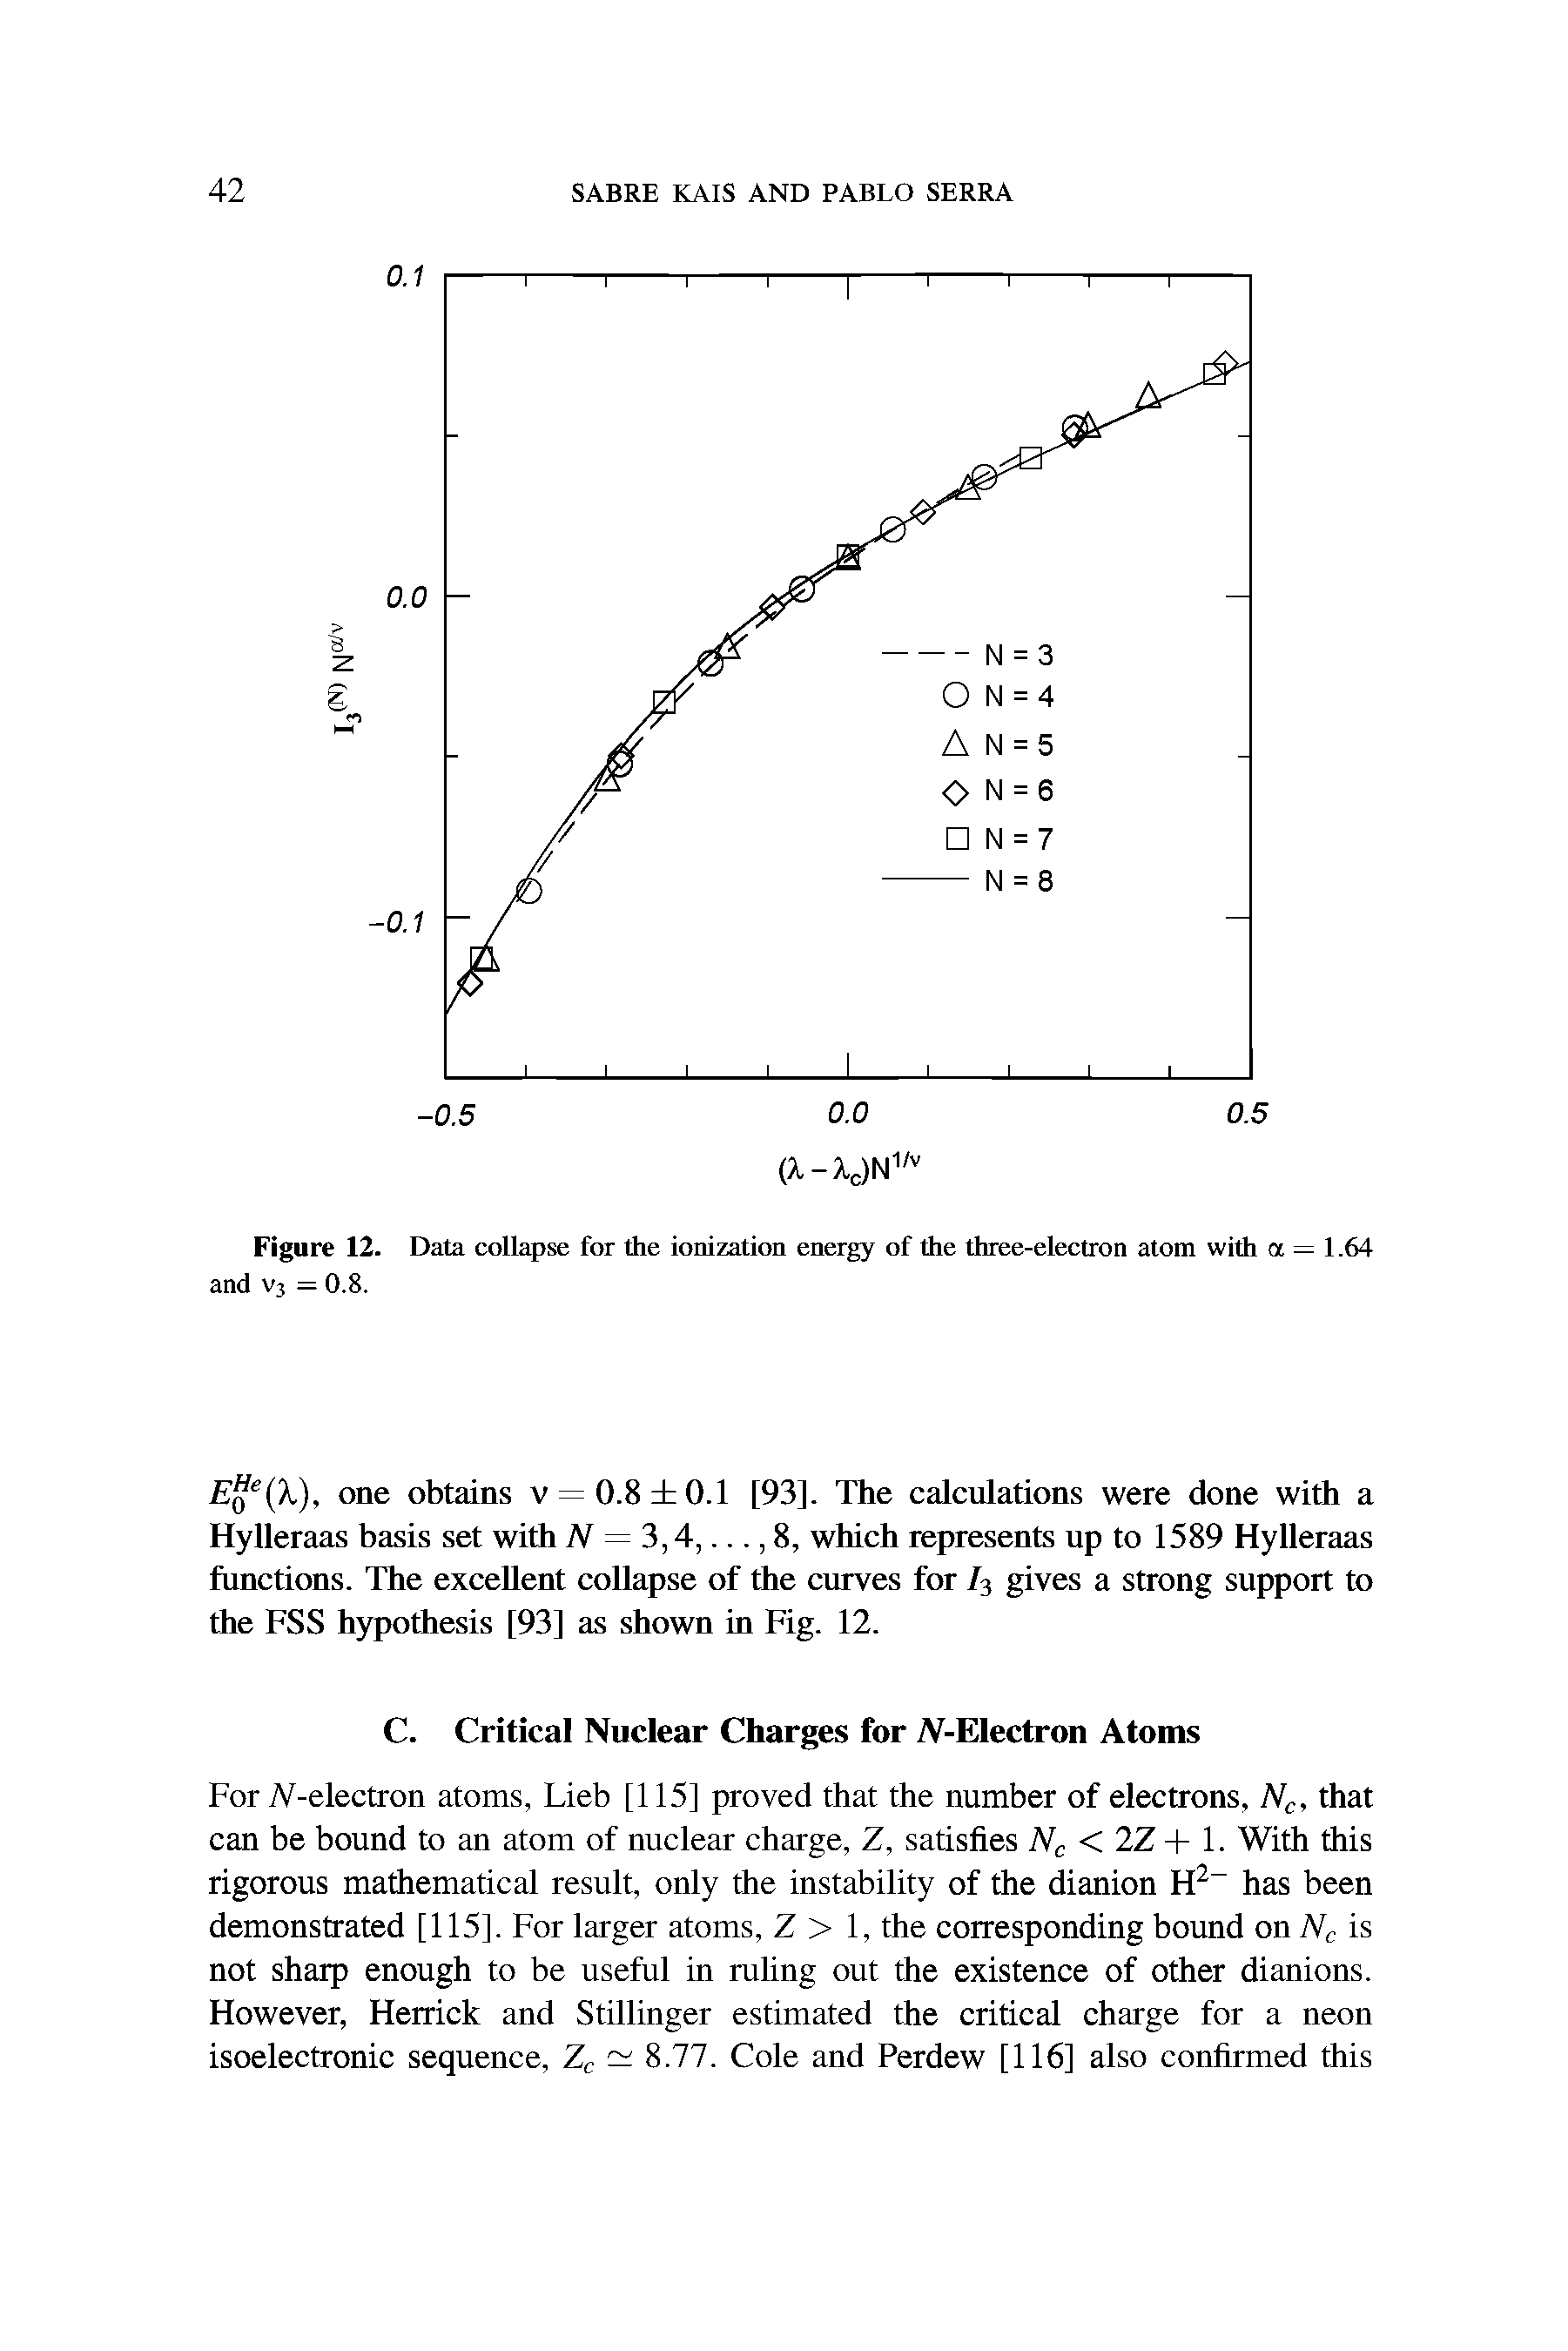 Figure 12. Data collapse for the ionization energy of the three-electron atom with a — 1.64 and V3 = 0.8.